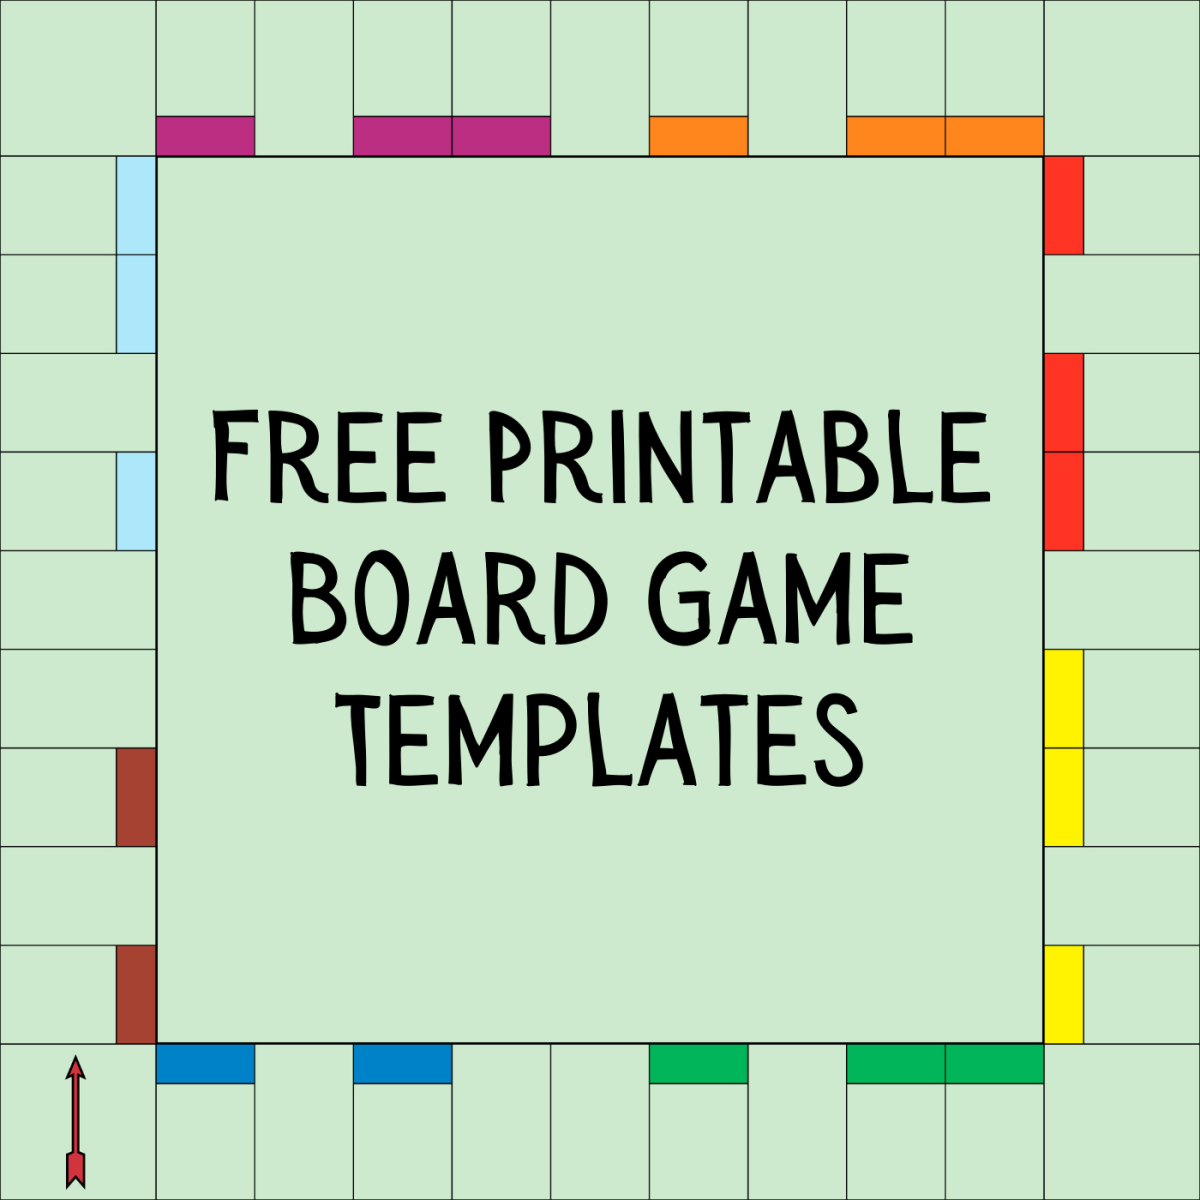 You can print your own blank Monopoly board and create a customized board game for your family! Find lots of printable boards here.